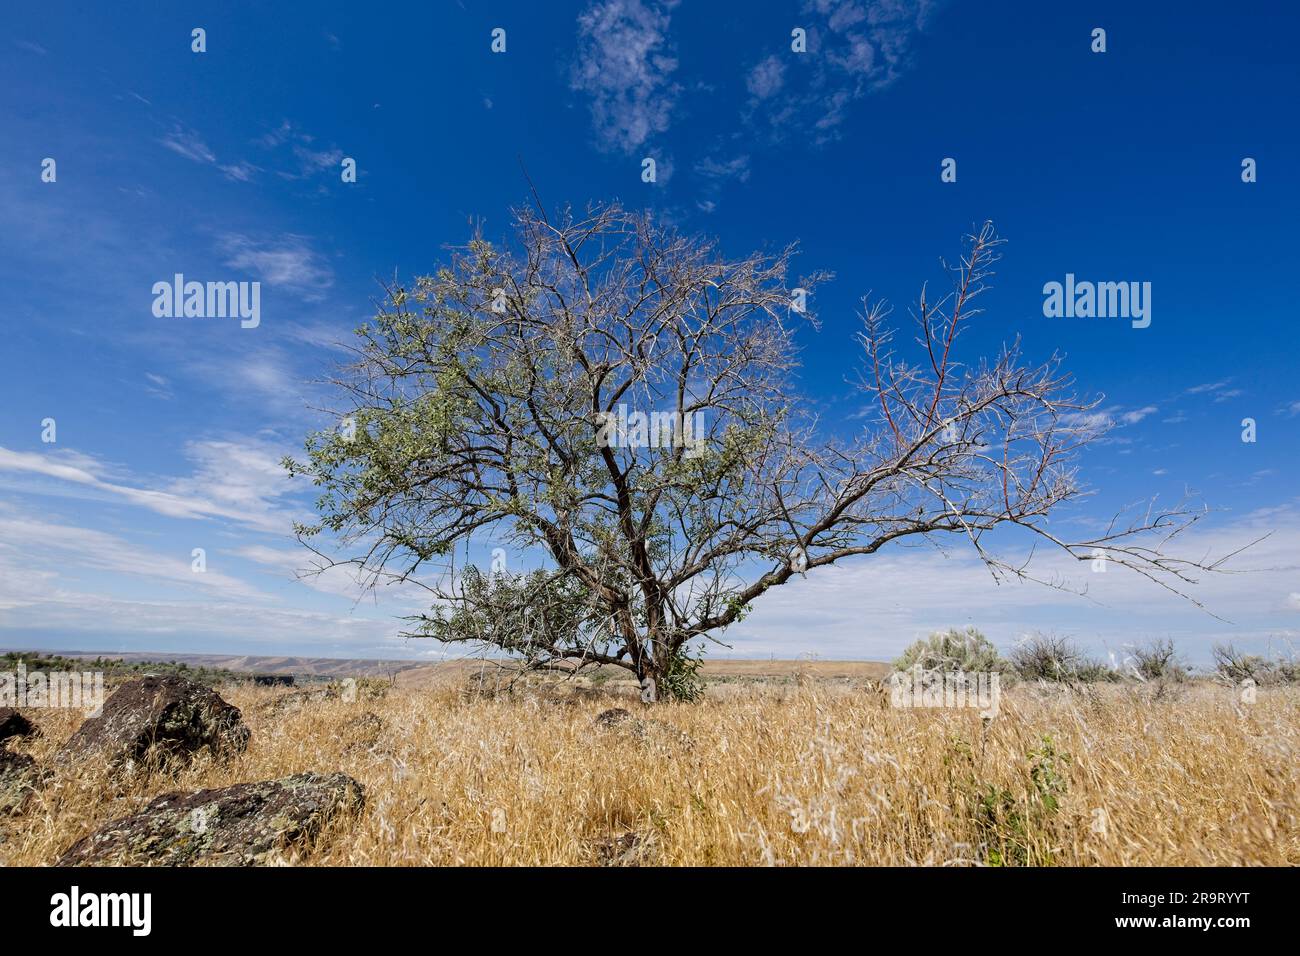 A small tree stands under a bright blue sky in a field of dry grass layered with rocks near Hagerman, Idaho. Stock Photo